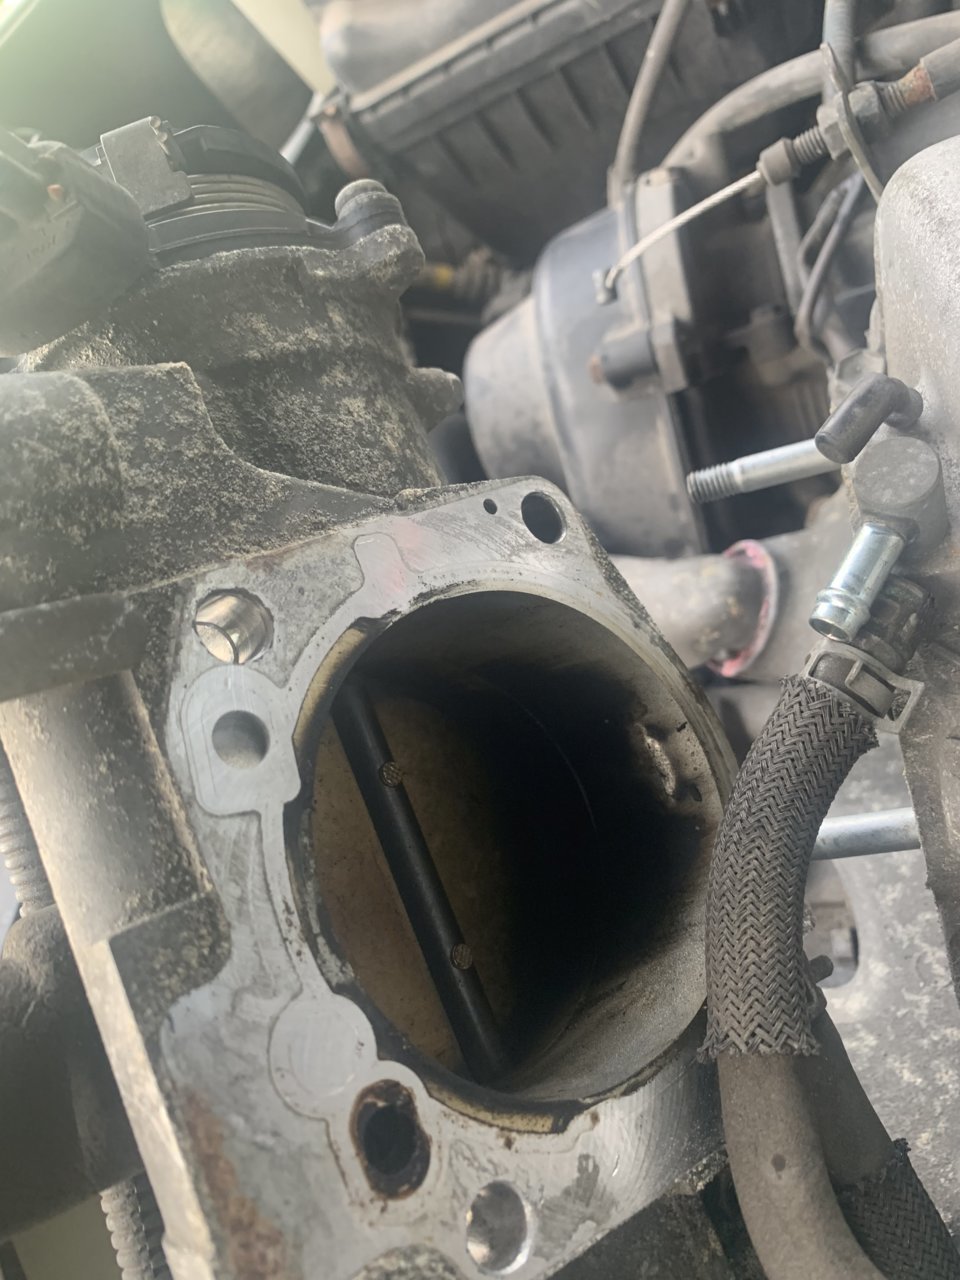 Intermittent rough idle issue S.O.S | Toyota Tundra Forum